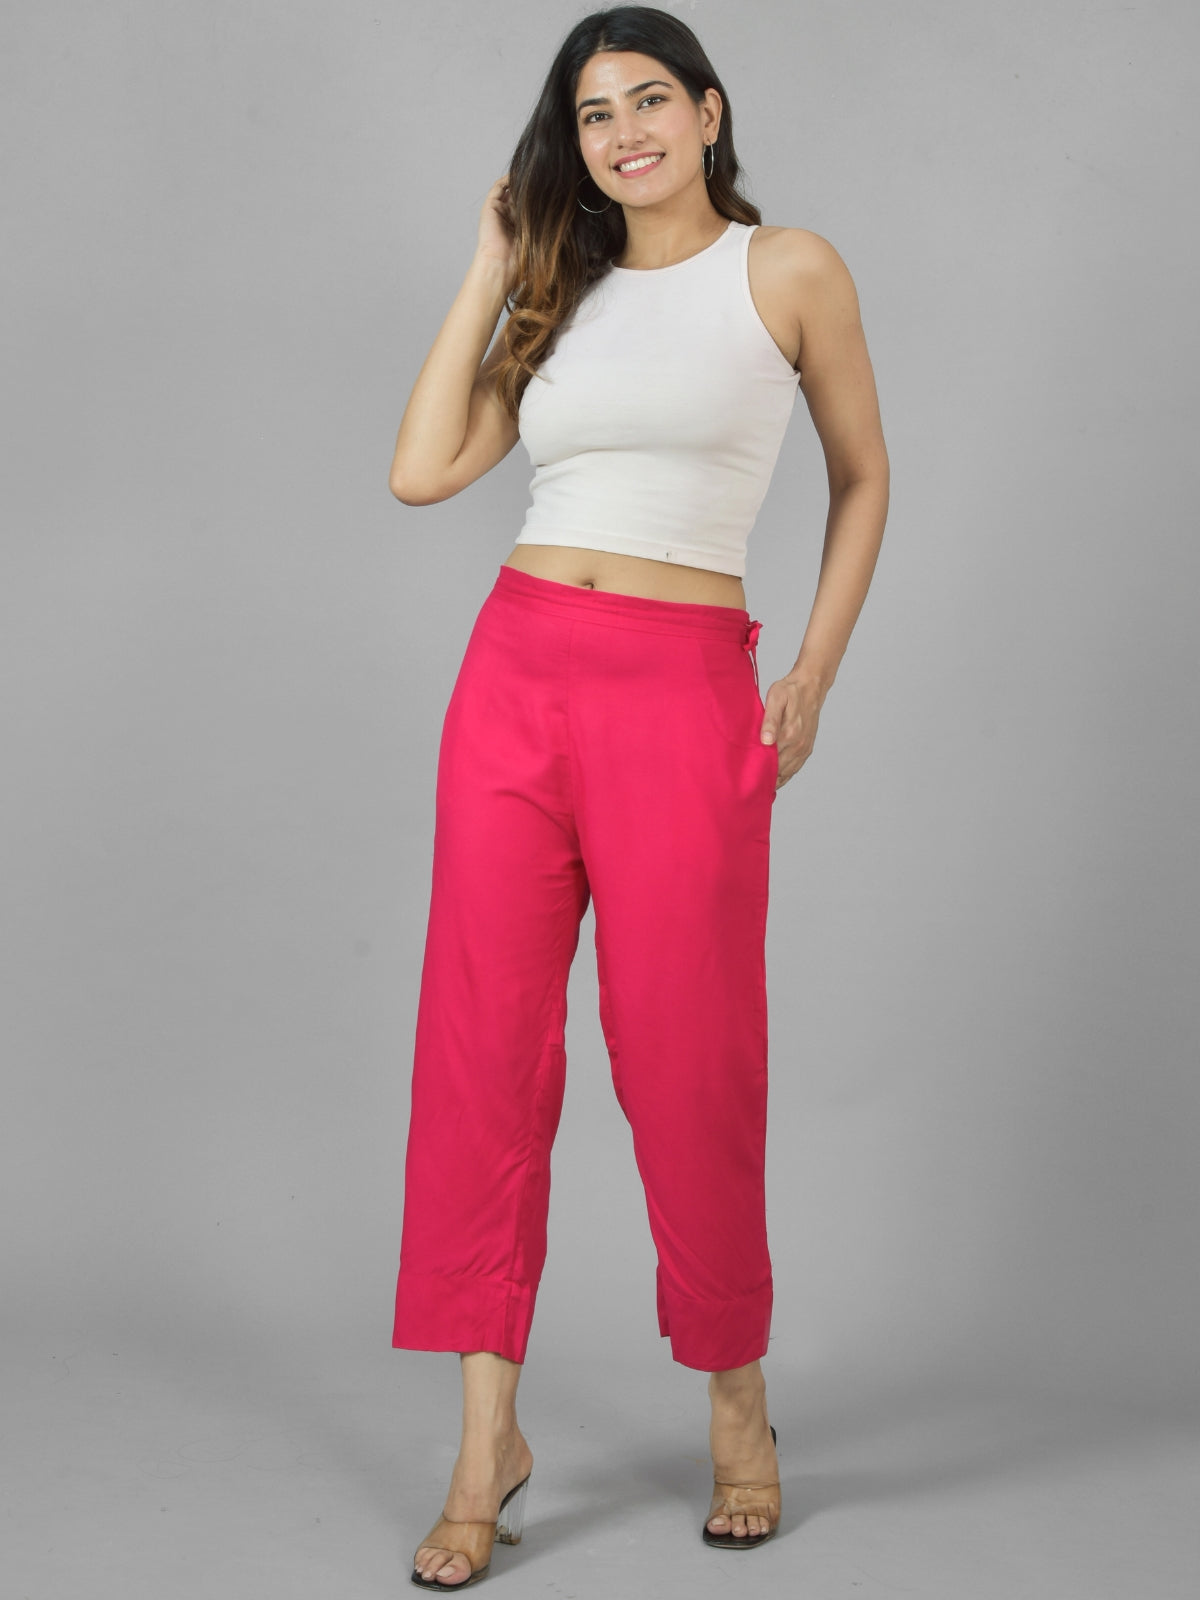 Women Solid Rani Pink Rayon Culottes Trouser